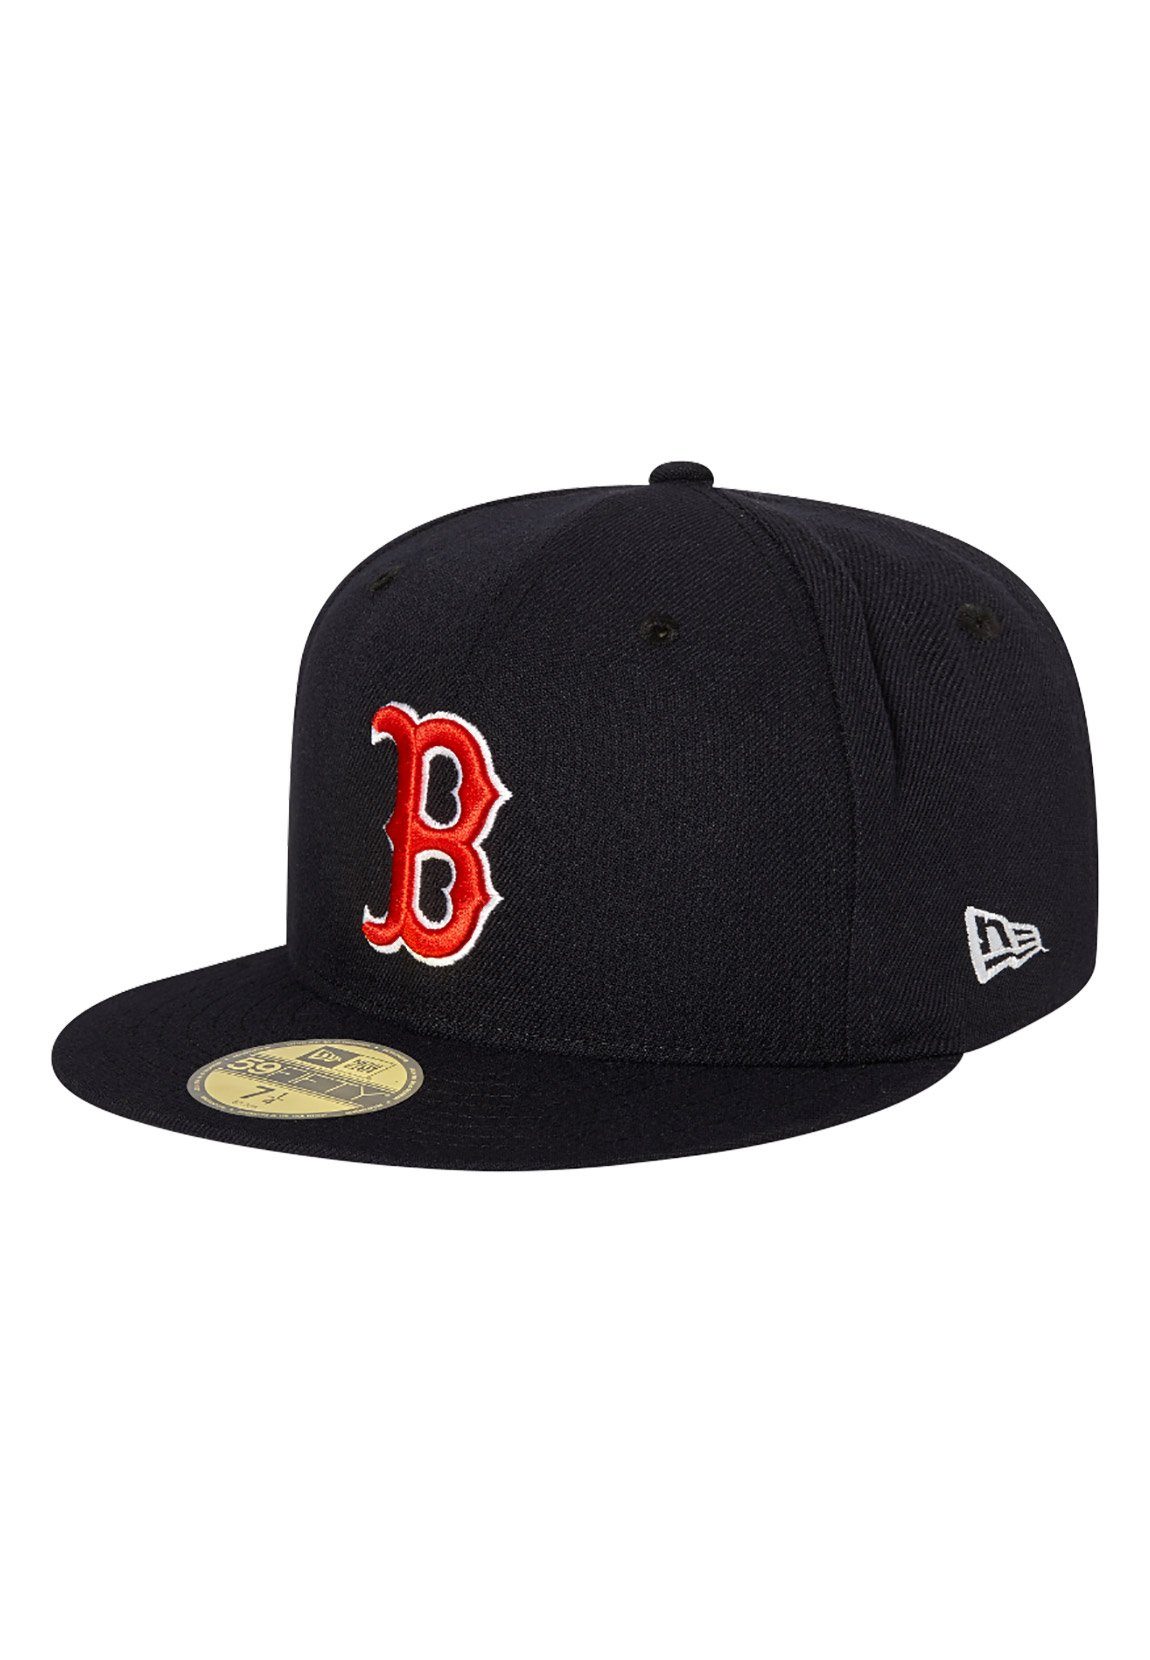 New Era Fitted Cap New Era Authentics Fitted Cap 59Fifty BOSTON RED SOX Dunkelblau Rot | Snapback Caps